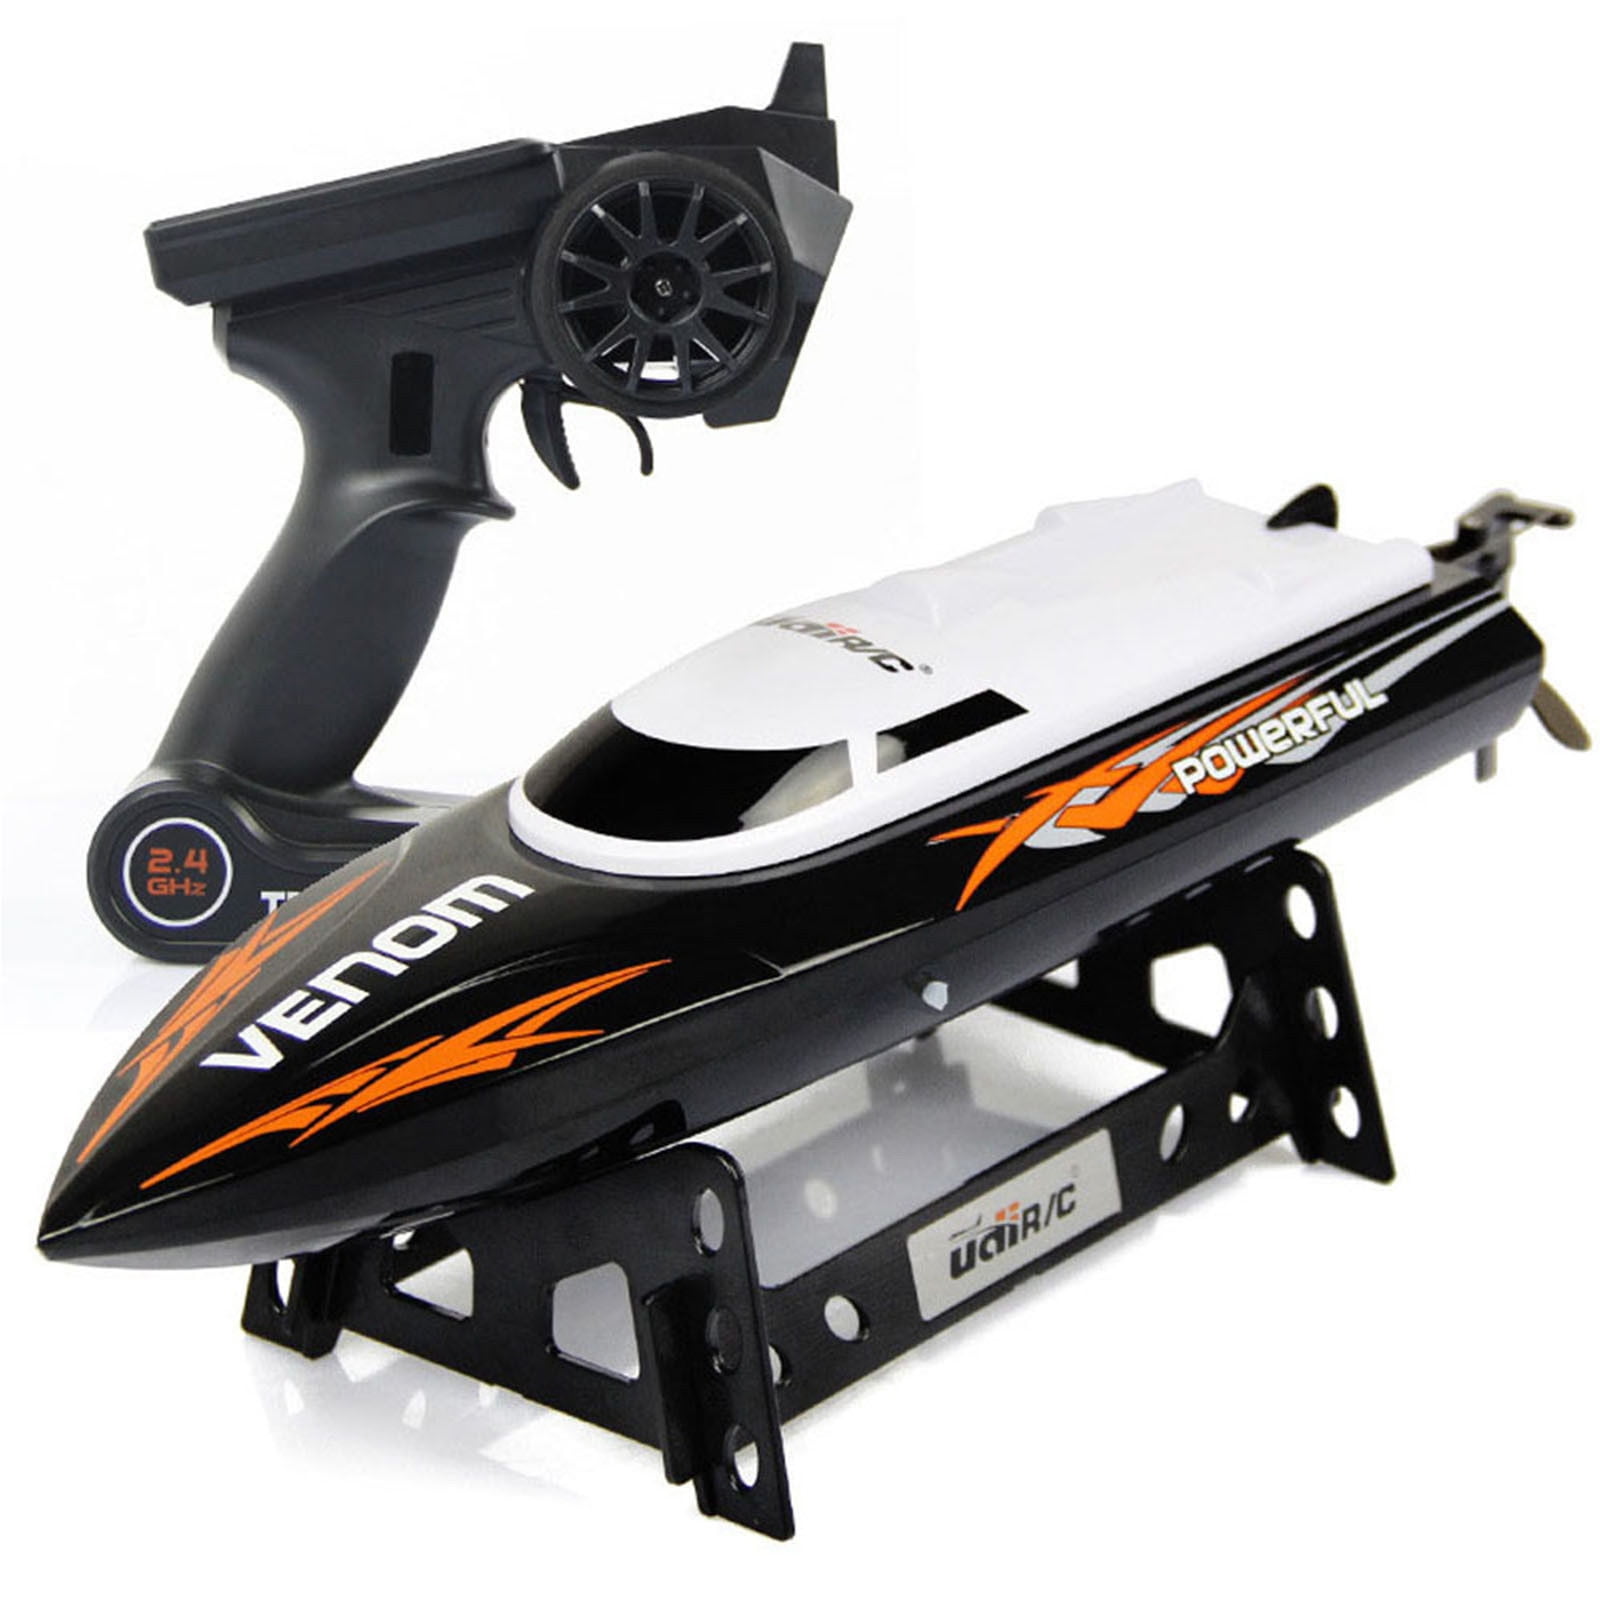 RC BOAT HIGH SPEED RADIO CONTROLLED MOTOR 20KM/H REMOTE CONTROLLED TOY GIFT U2V7 